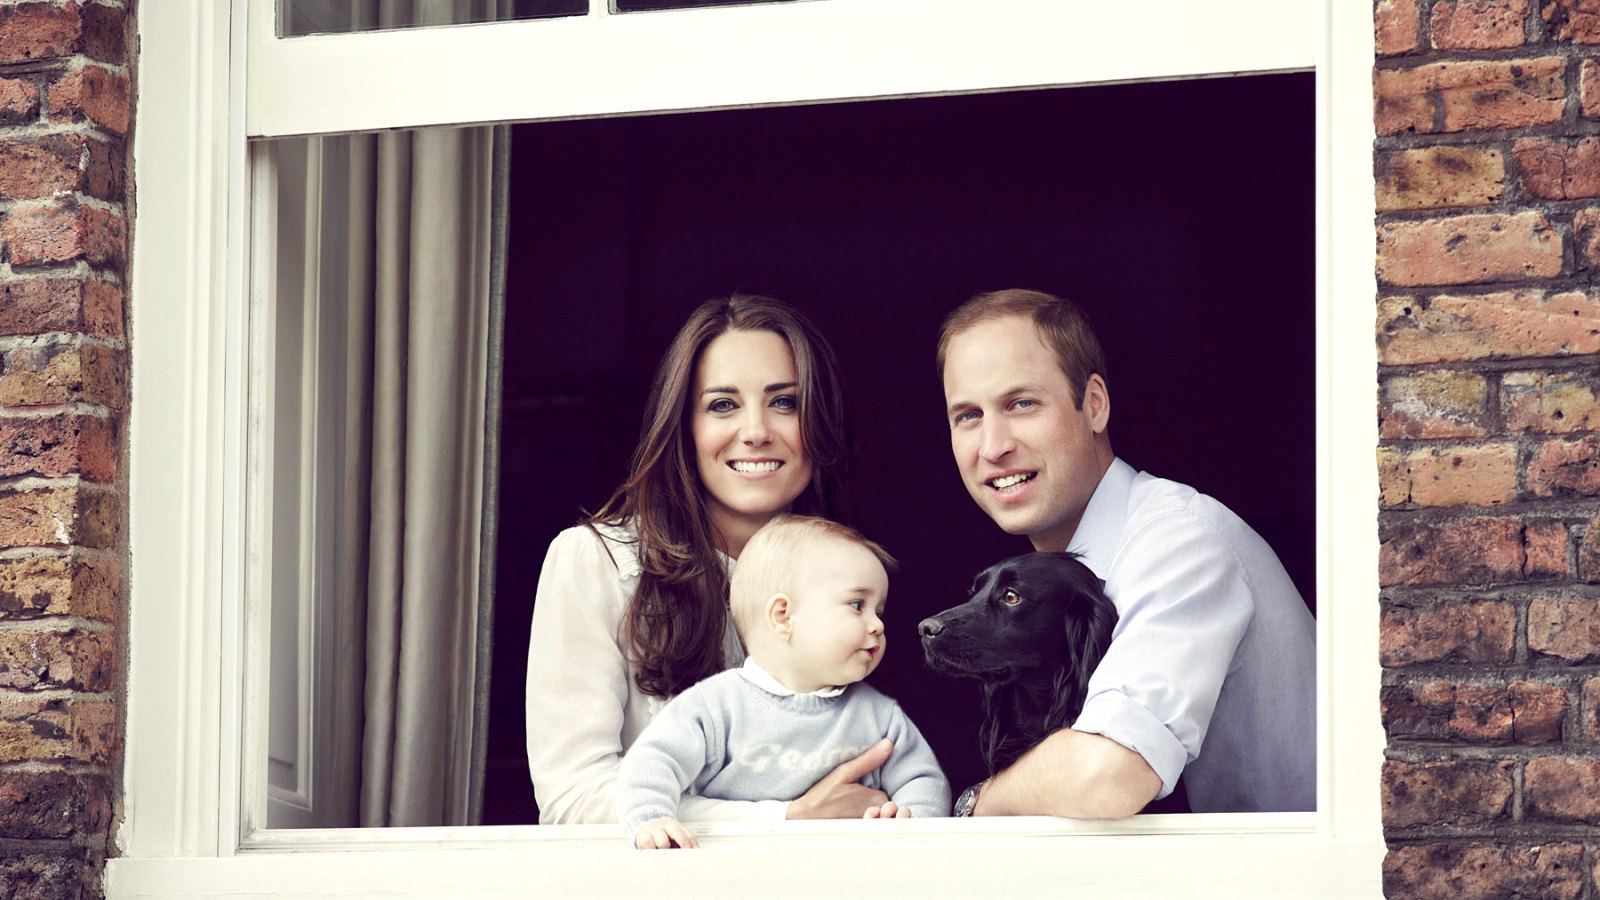 Kate Middleton, Prince George and Prince William at Kensington Palace